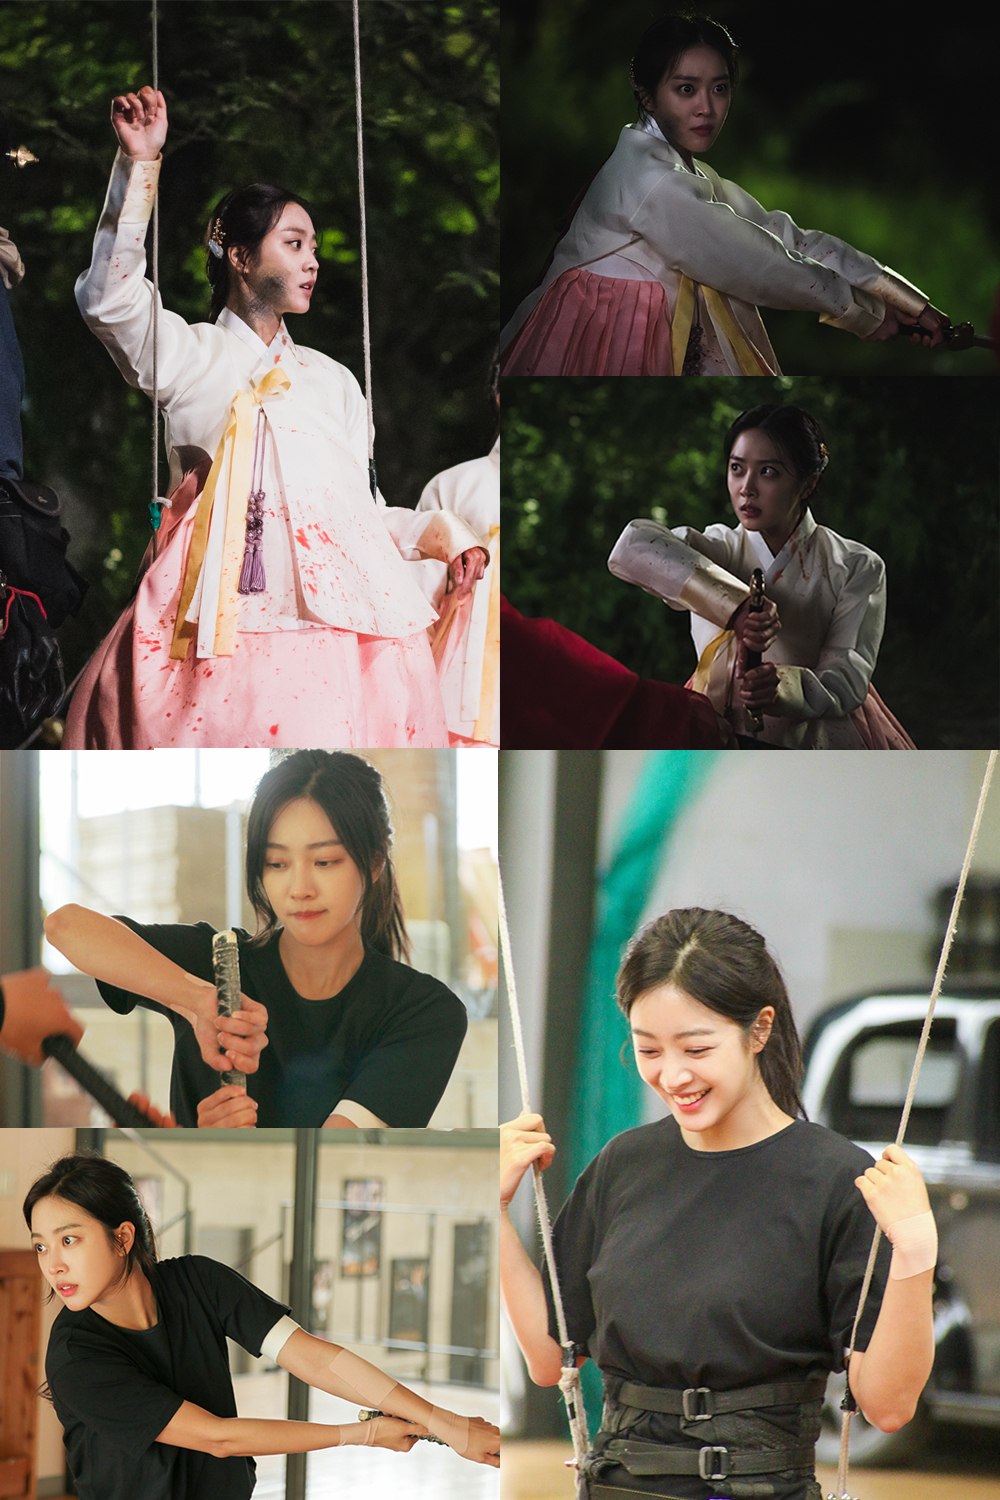 The first action shoot Top Model of Actor Jo Bo-ah has been released.Jo Bo-ahs agency showed a person who was sold out to the shooting scene and practice of Jo Bo-ah, who is about to take his first action action action action on the TVN tree drama The Tale of a Gumiho (playplayplayed by Han Woo-ri / directed by Kang Shin-hyo) on November 9.The photo released is a scene where a child who gave up to Lee Moo-ki fights with Yiyeon in the 10th episode of The Tale of a Gumiho broadcast on the 5th, and Jo Bo-ah is a picture of Jias former character, Aum.The eyes are caught in the eyes of a dangling from a wire or wielding a knife.This scene was especially important not only for action but also for emotional acting.The sudden change of the weapon and the appearance of killing Yiyeon was completely different from that of Jia and Aum, and the character was changed so that the inside was creepy with the changing expression and eyes every minute and completely digested the emotion Acting.For the first action shoot of his life, Jo Bo-ah focused on action school for Dani Alves and Wire and martial arts practice for several months.It was a short god, but it was a natural action that showed the effort to digest the feelings of the character.As a result of this passionate effort, Jo Bo-ah is showing the awkwardness or clumsy acting of the first Top Model action scenes, while enhancing the pleasure of digesting the character without missing the delicate parts such as speech, eyes, and facial expressions.hwang hye-jin